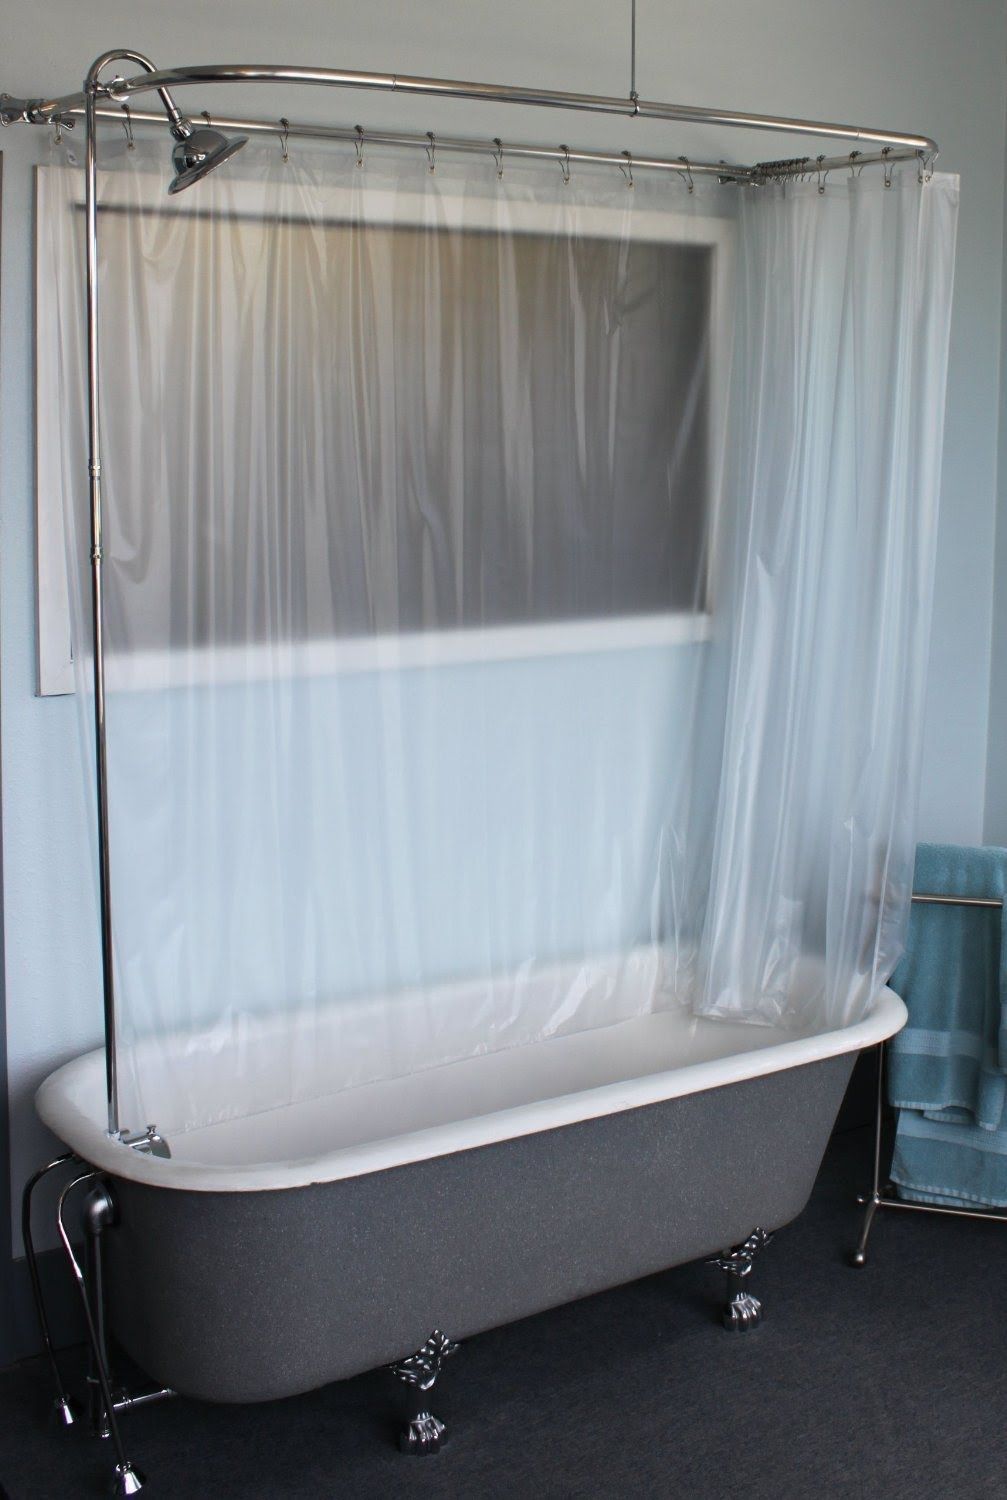 Claw Foot Tub Wall Mounted Shower Curtain Rod Add A Shower With In Shower Curtains For Clawfoot Tubs (View 5 of 25)